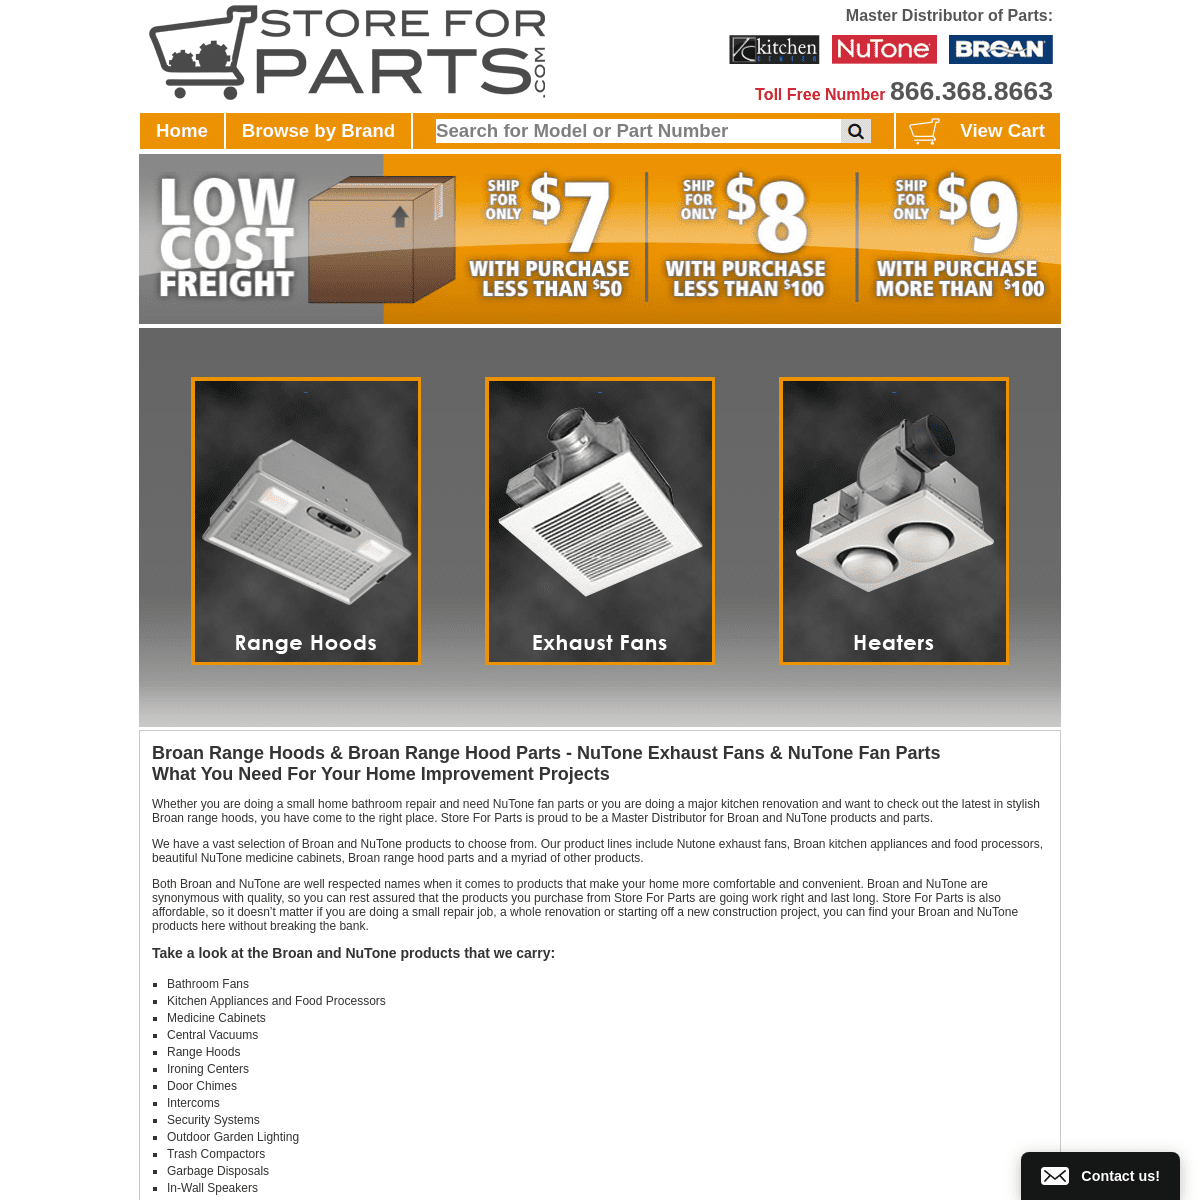 A complete backup of storeforparts.com